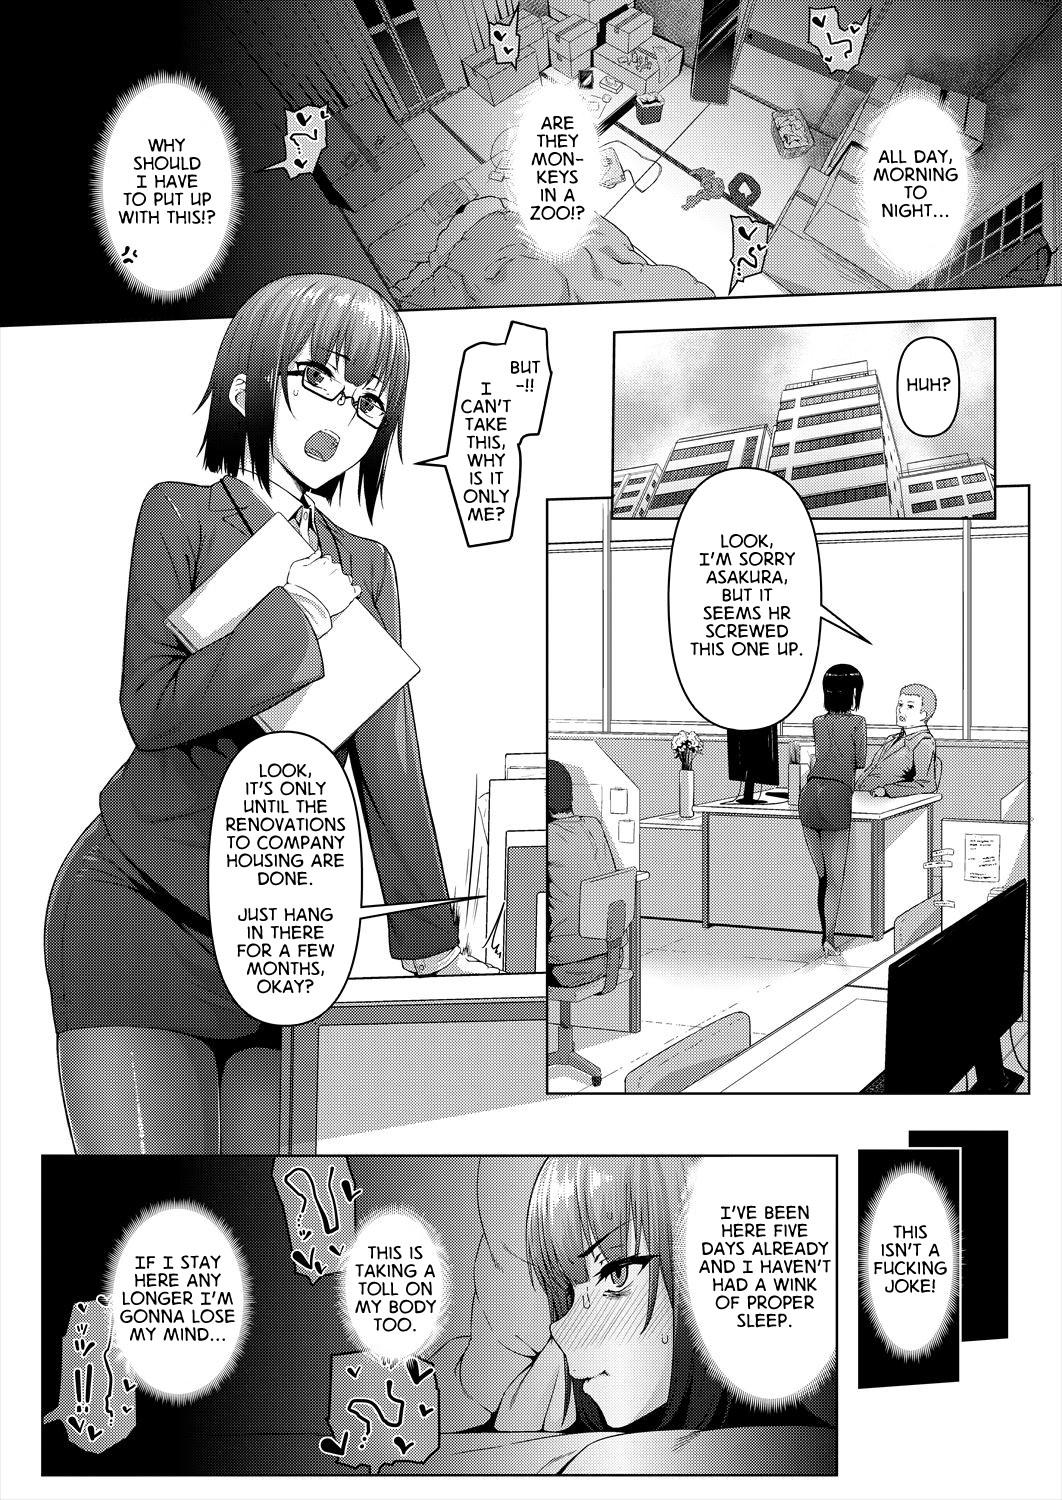 3some Kankyouon Ch. 1 | Banging Ambience Ch. 1 - Original Chicks - Page 2